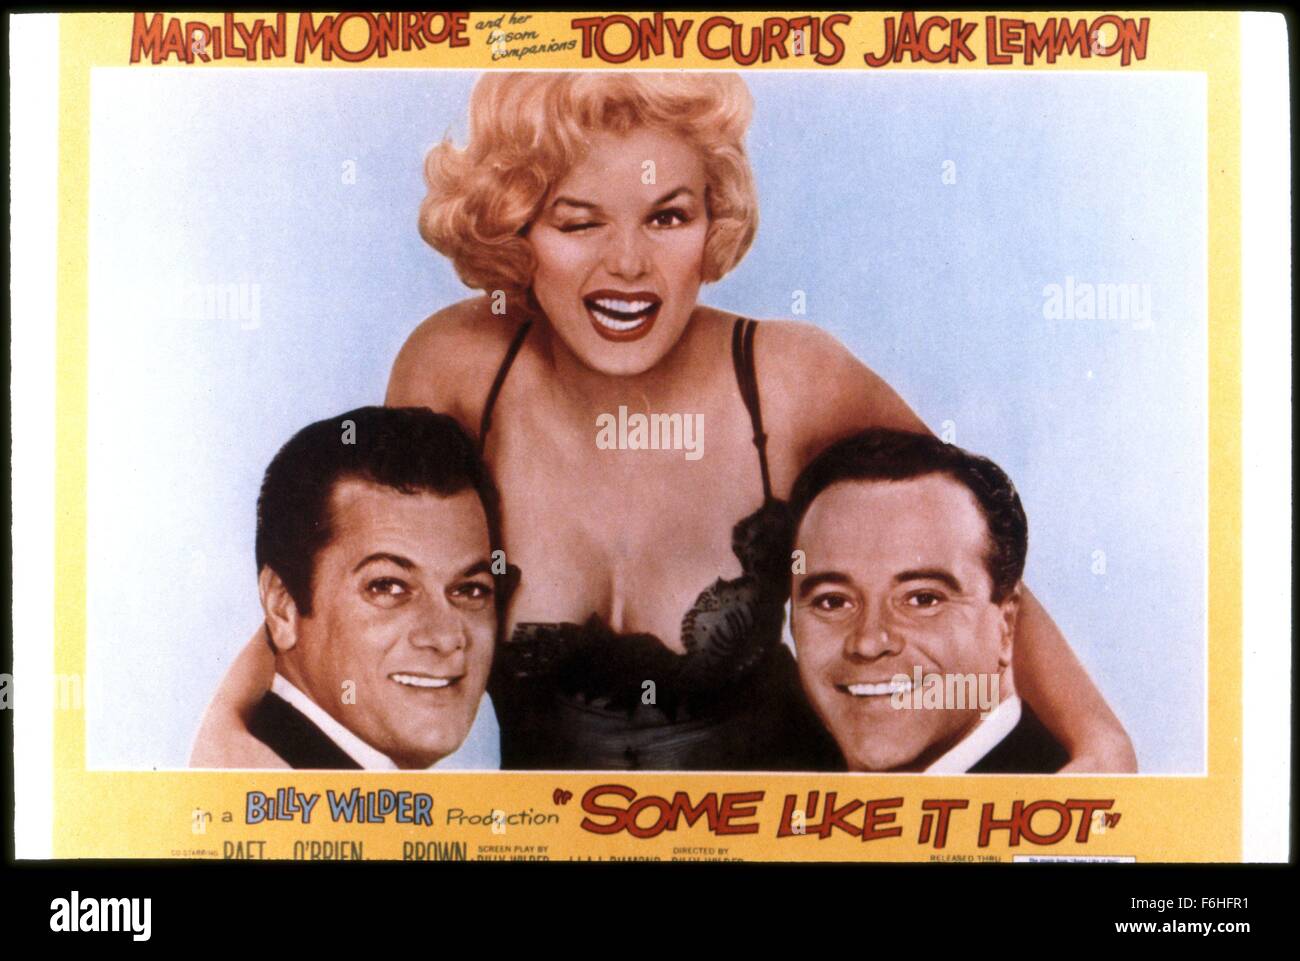 1959, Film Title: SOME LIKE IT HOT, Director: BILLY WILDER, Studio: UA, Pictured: TONY CURTIS, JACK LEMMON, MARILYN MONROE, WINKING, DRAG, GIRL BAND. (Credit Image: SNAP) Stock Photo